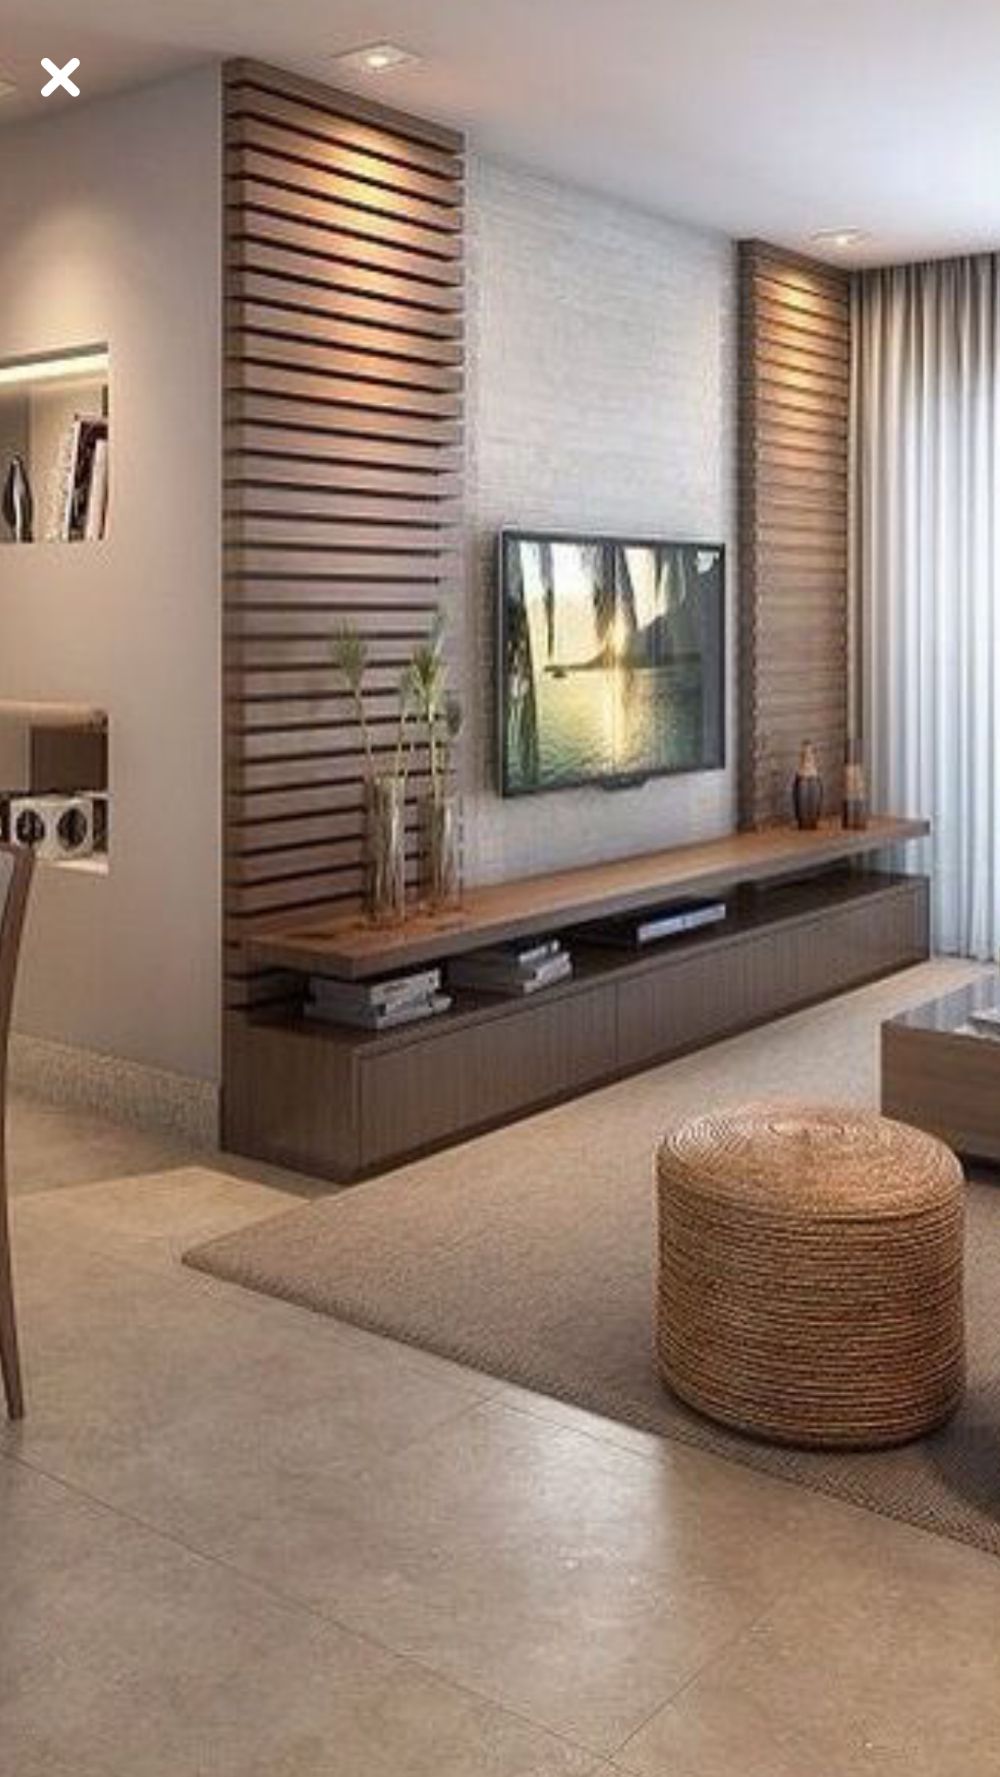 Tv Cabinet Design, Tv Wall Design, Tv Unit Design, Wall Pertaining To Full Wall Tv Cabinets (View 2 of 15)